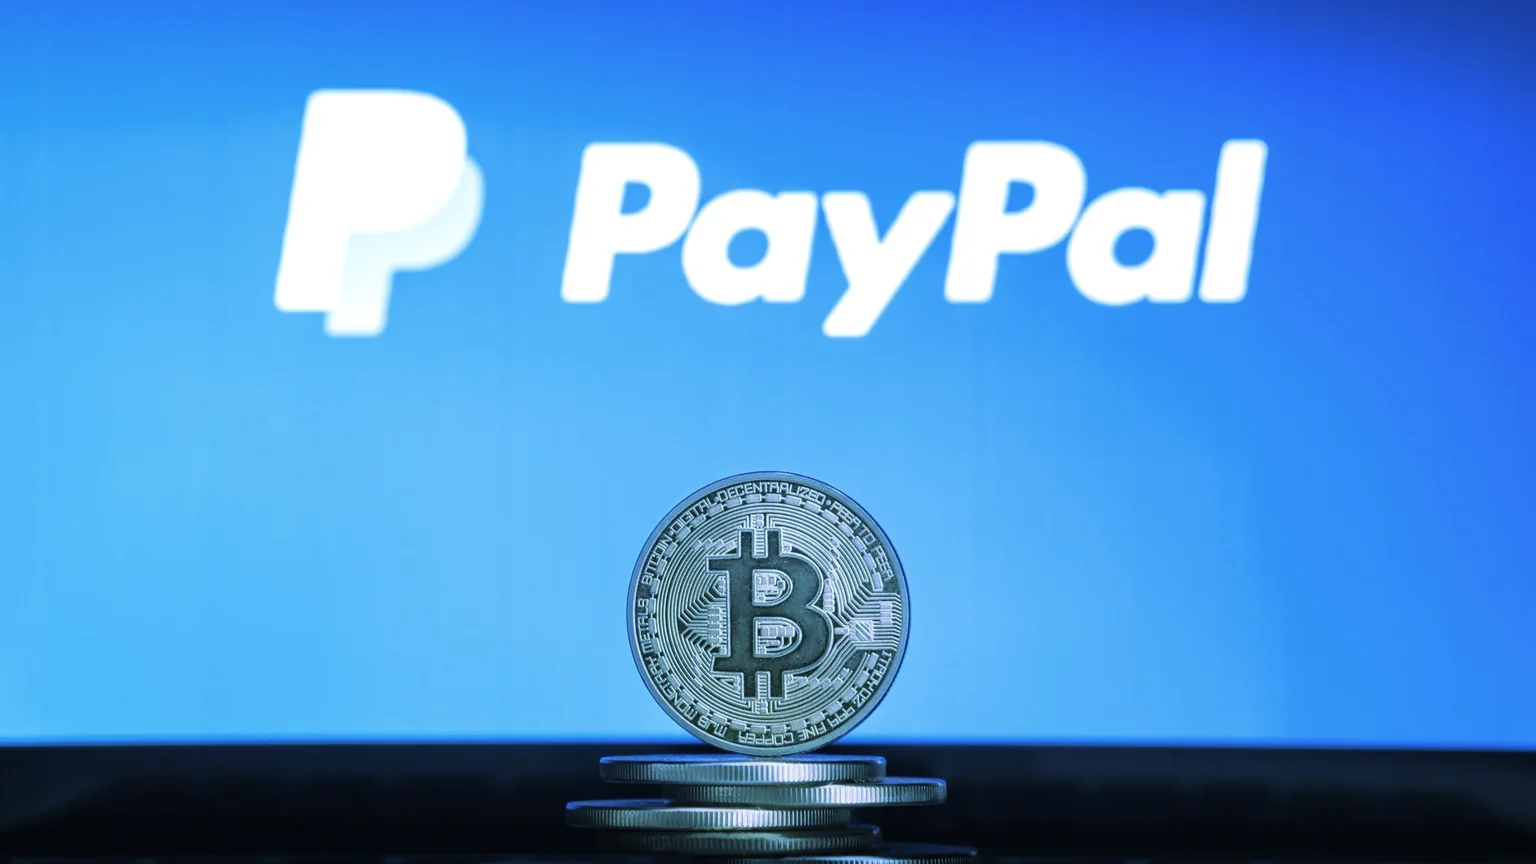 PayPal has a global user base of over 300 million. Image: Shutterstock